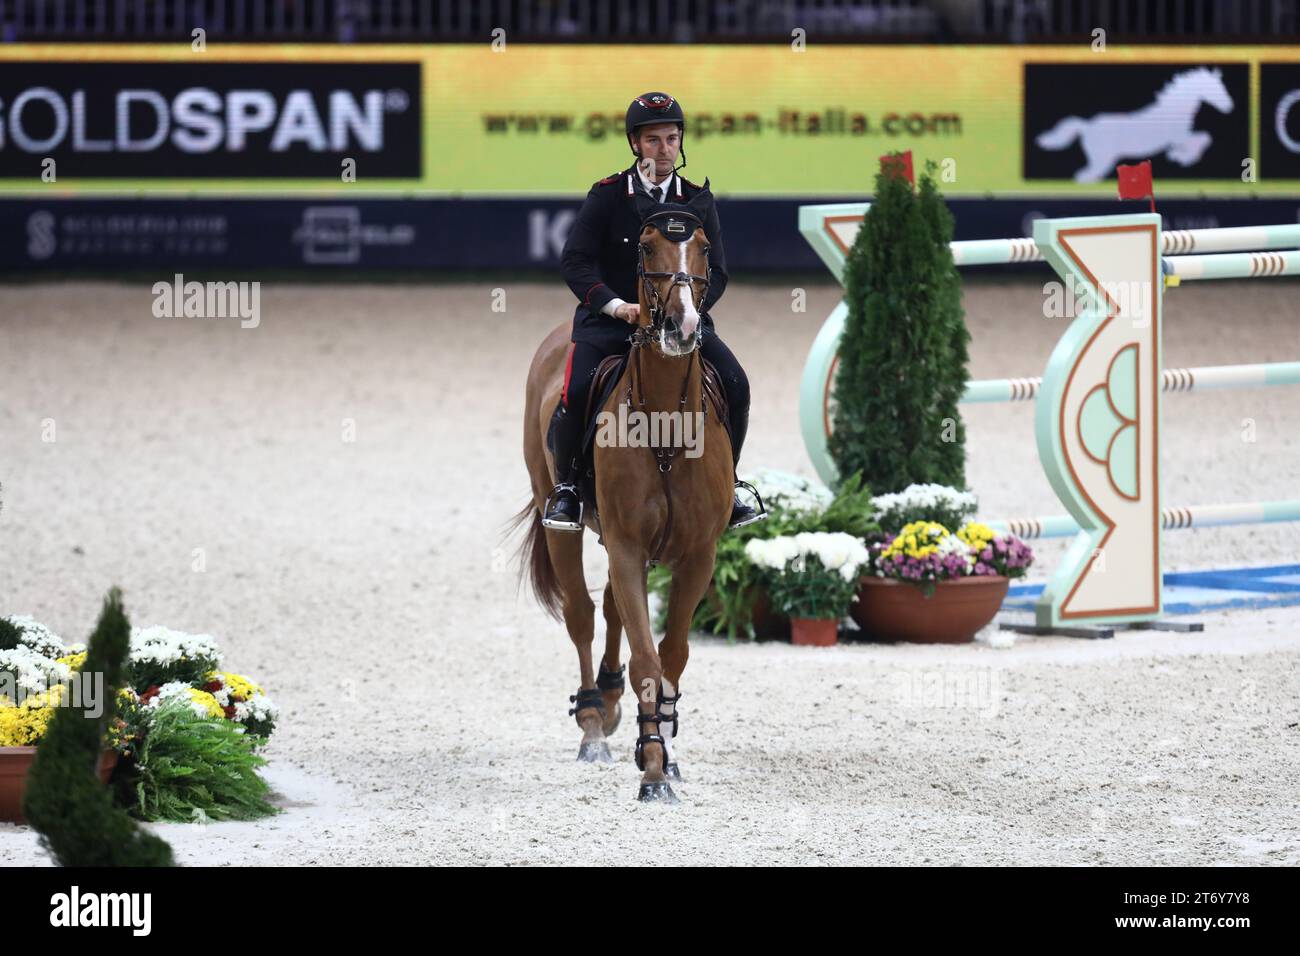 Emanuele Gaudiano of Italy competes in the LONGINES FEI Jumping World Cup™ Verona Stock Photo